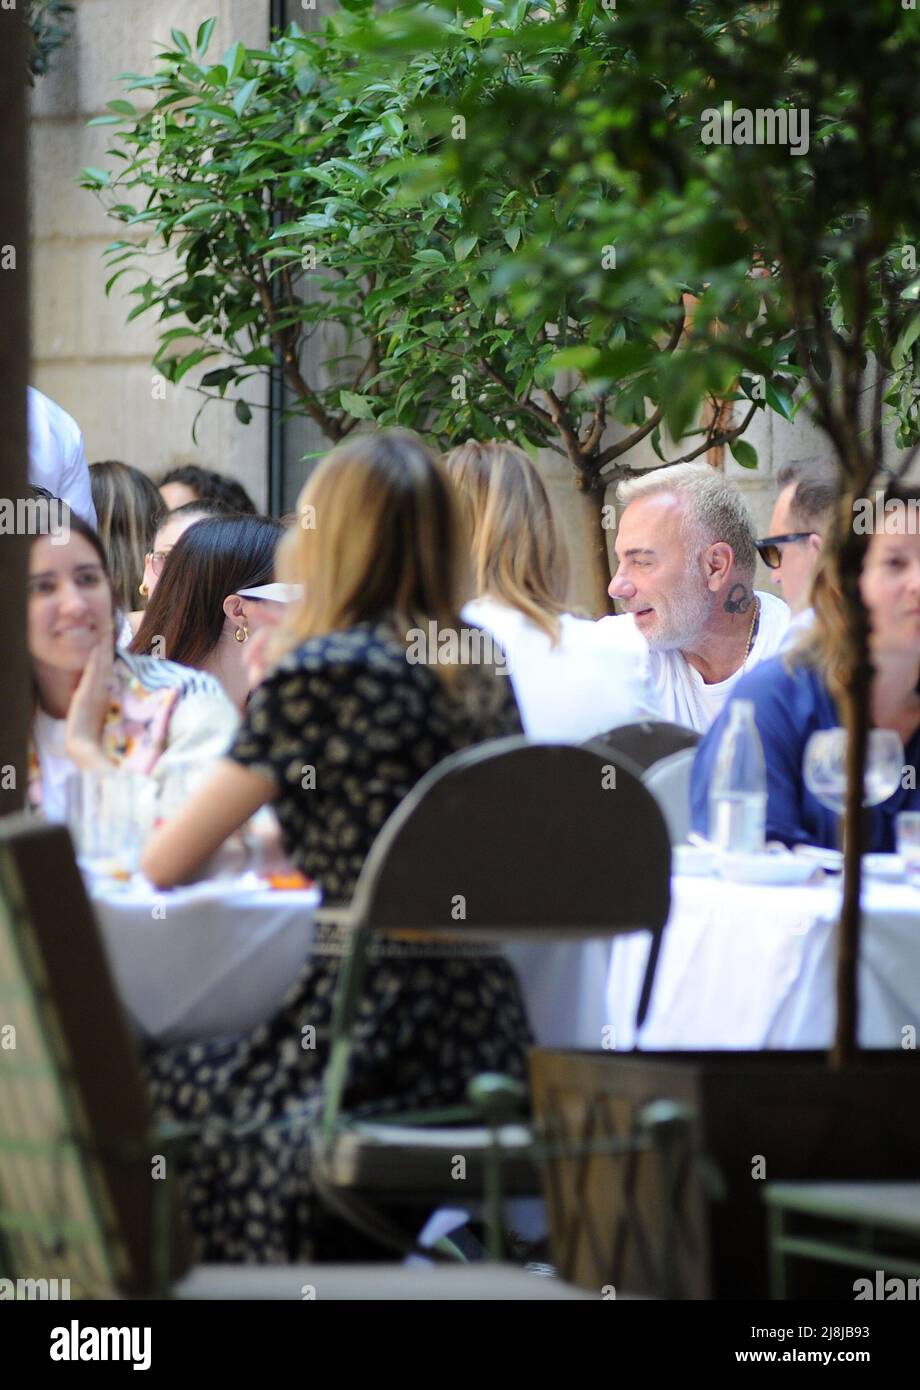 Milan, . 16th May, 2022. Milan, 16-05-2022 Gianluca Vacchi and his girlfriend Sharon Fonseca surprised at lunch in a well-known restaurant in the center. After having eaten at the 'Salumaio di Montenapoleone' they go out, and after having given some souvenir photos they take a walk until they reach home, leaving their luxurious Rolls Royce in velvet with initials parked near the house with their driver. EXCLUSIVE SERVICE Credit: Independent Photo Agency/Alamy Live News Stock Photo